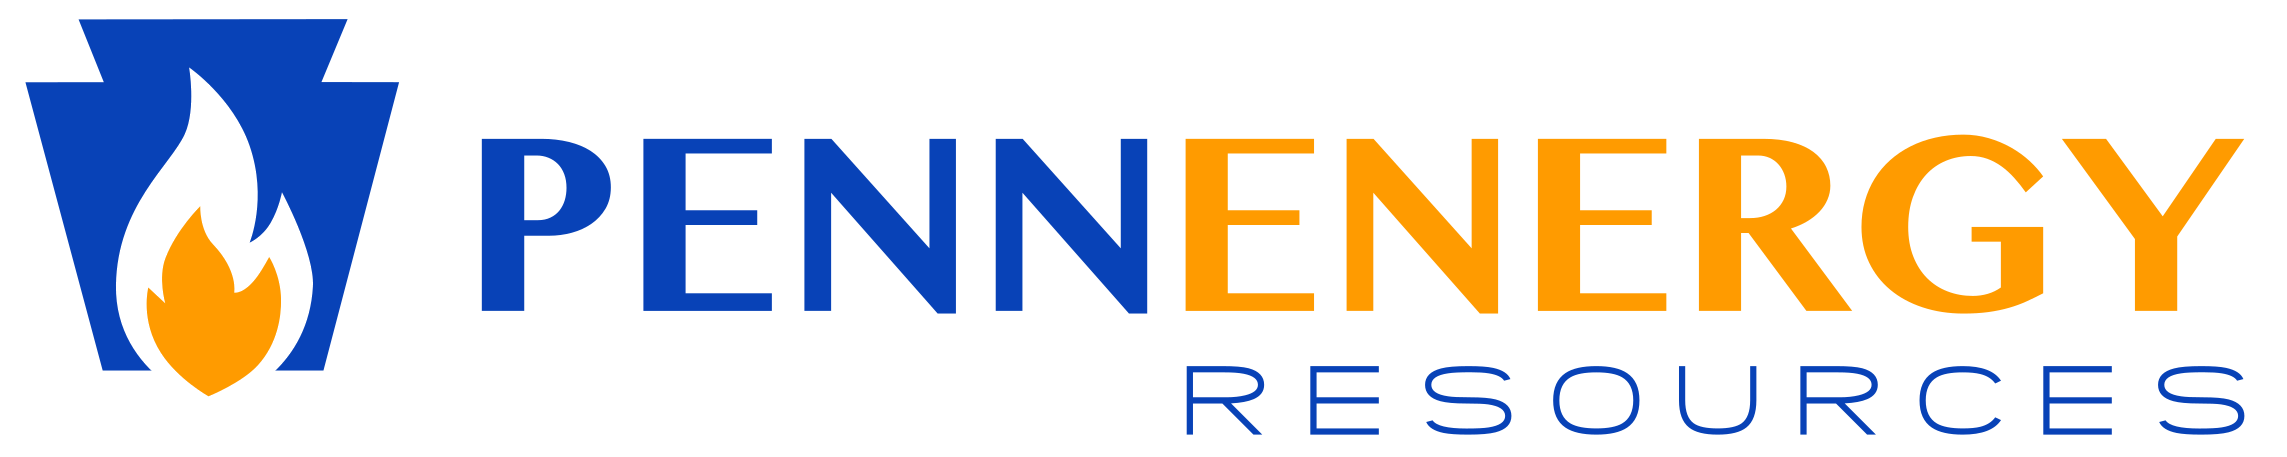 PennEnergy Logo Hi Res (002).png